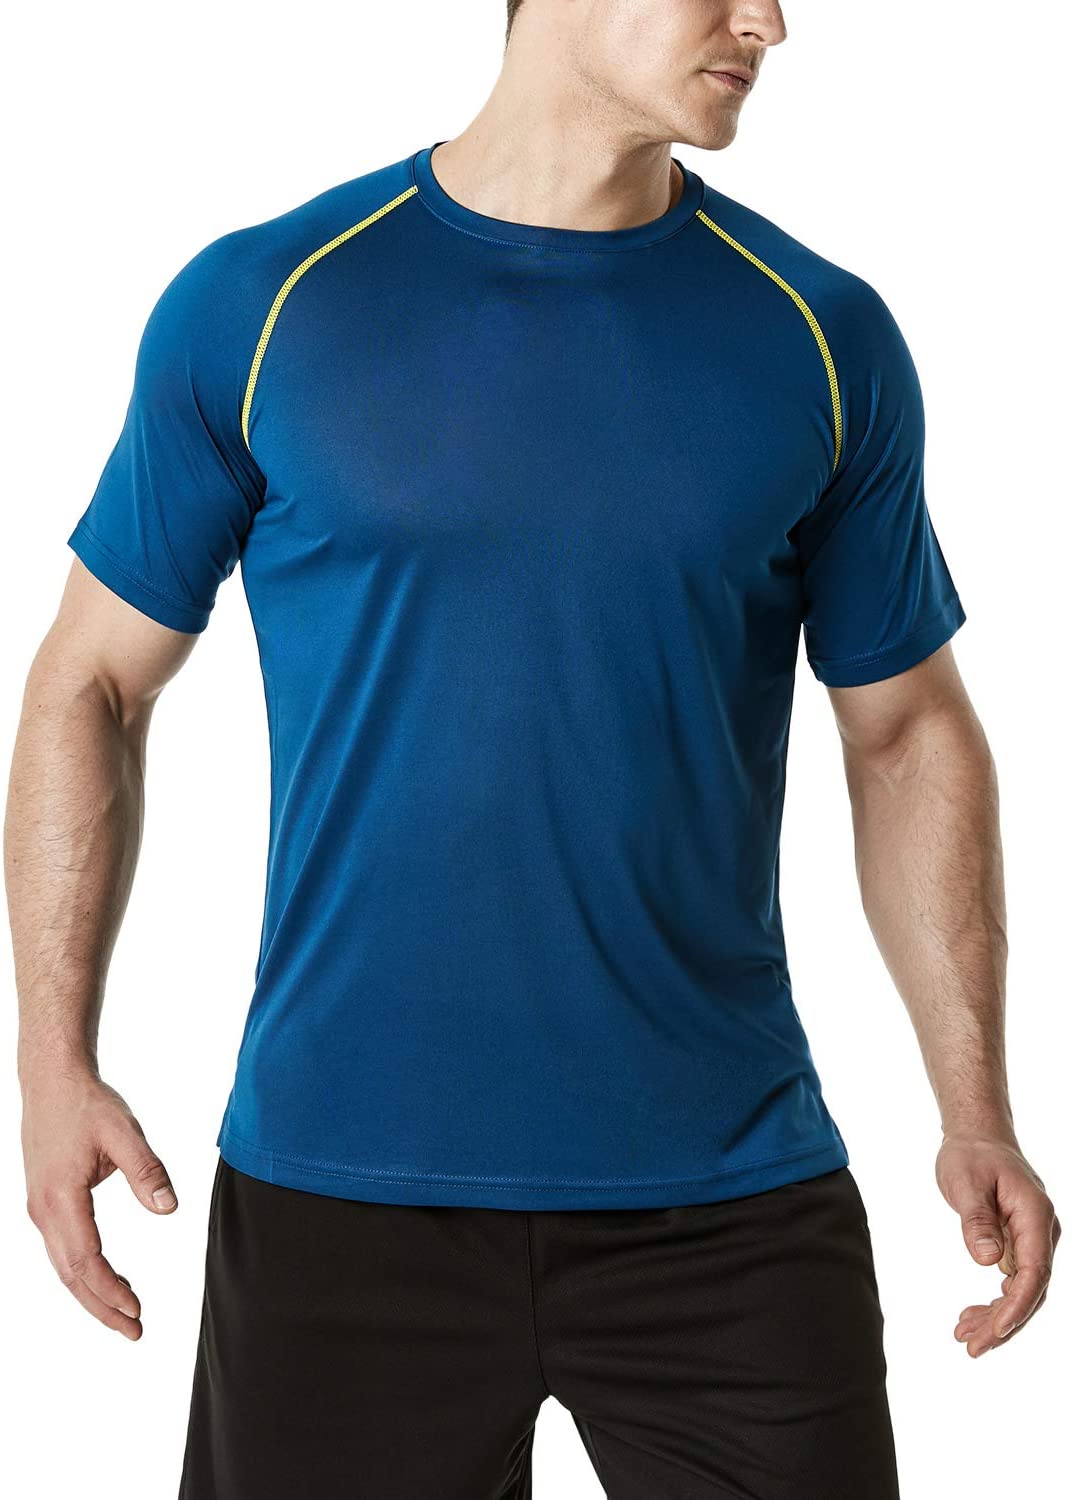 TSLA 1 or 2 Pack Men's Workout Running Shirts Sports Gym Athletic Short Sleeve Shirts Dry Fit Moisture Wicking T-Shirts 